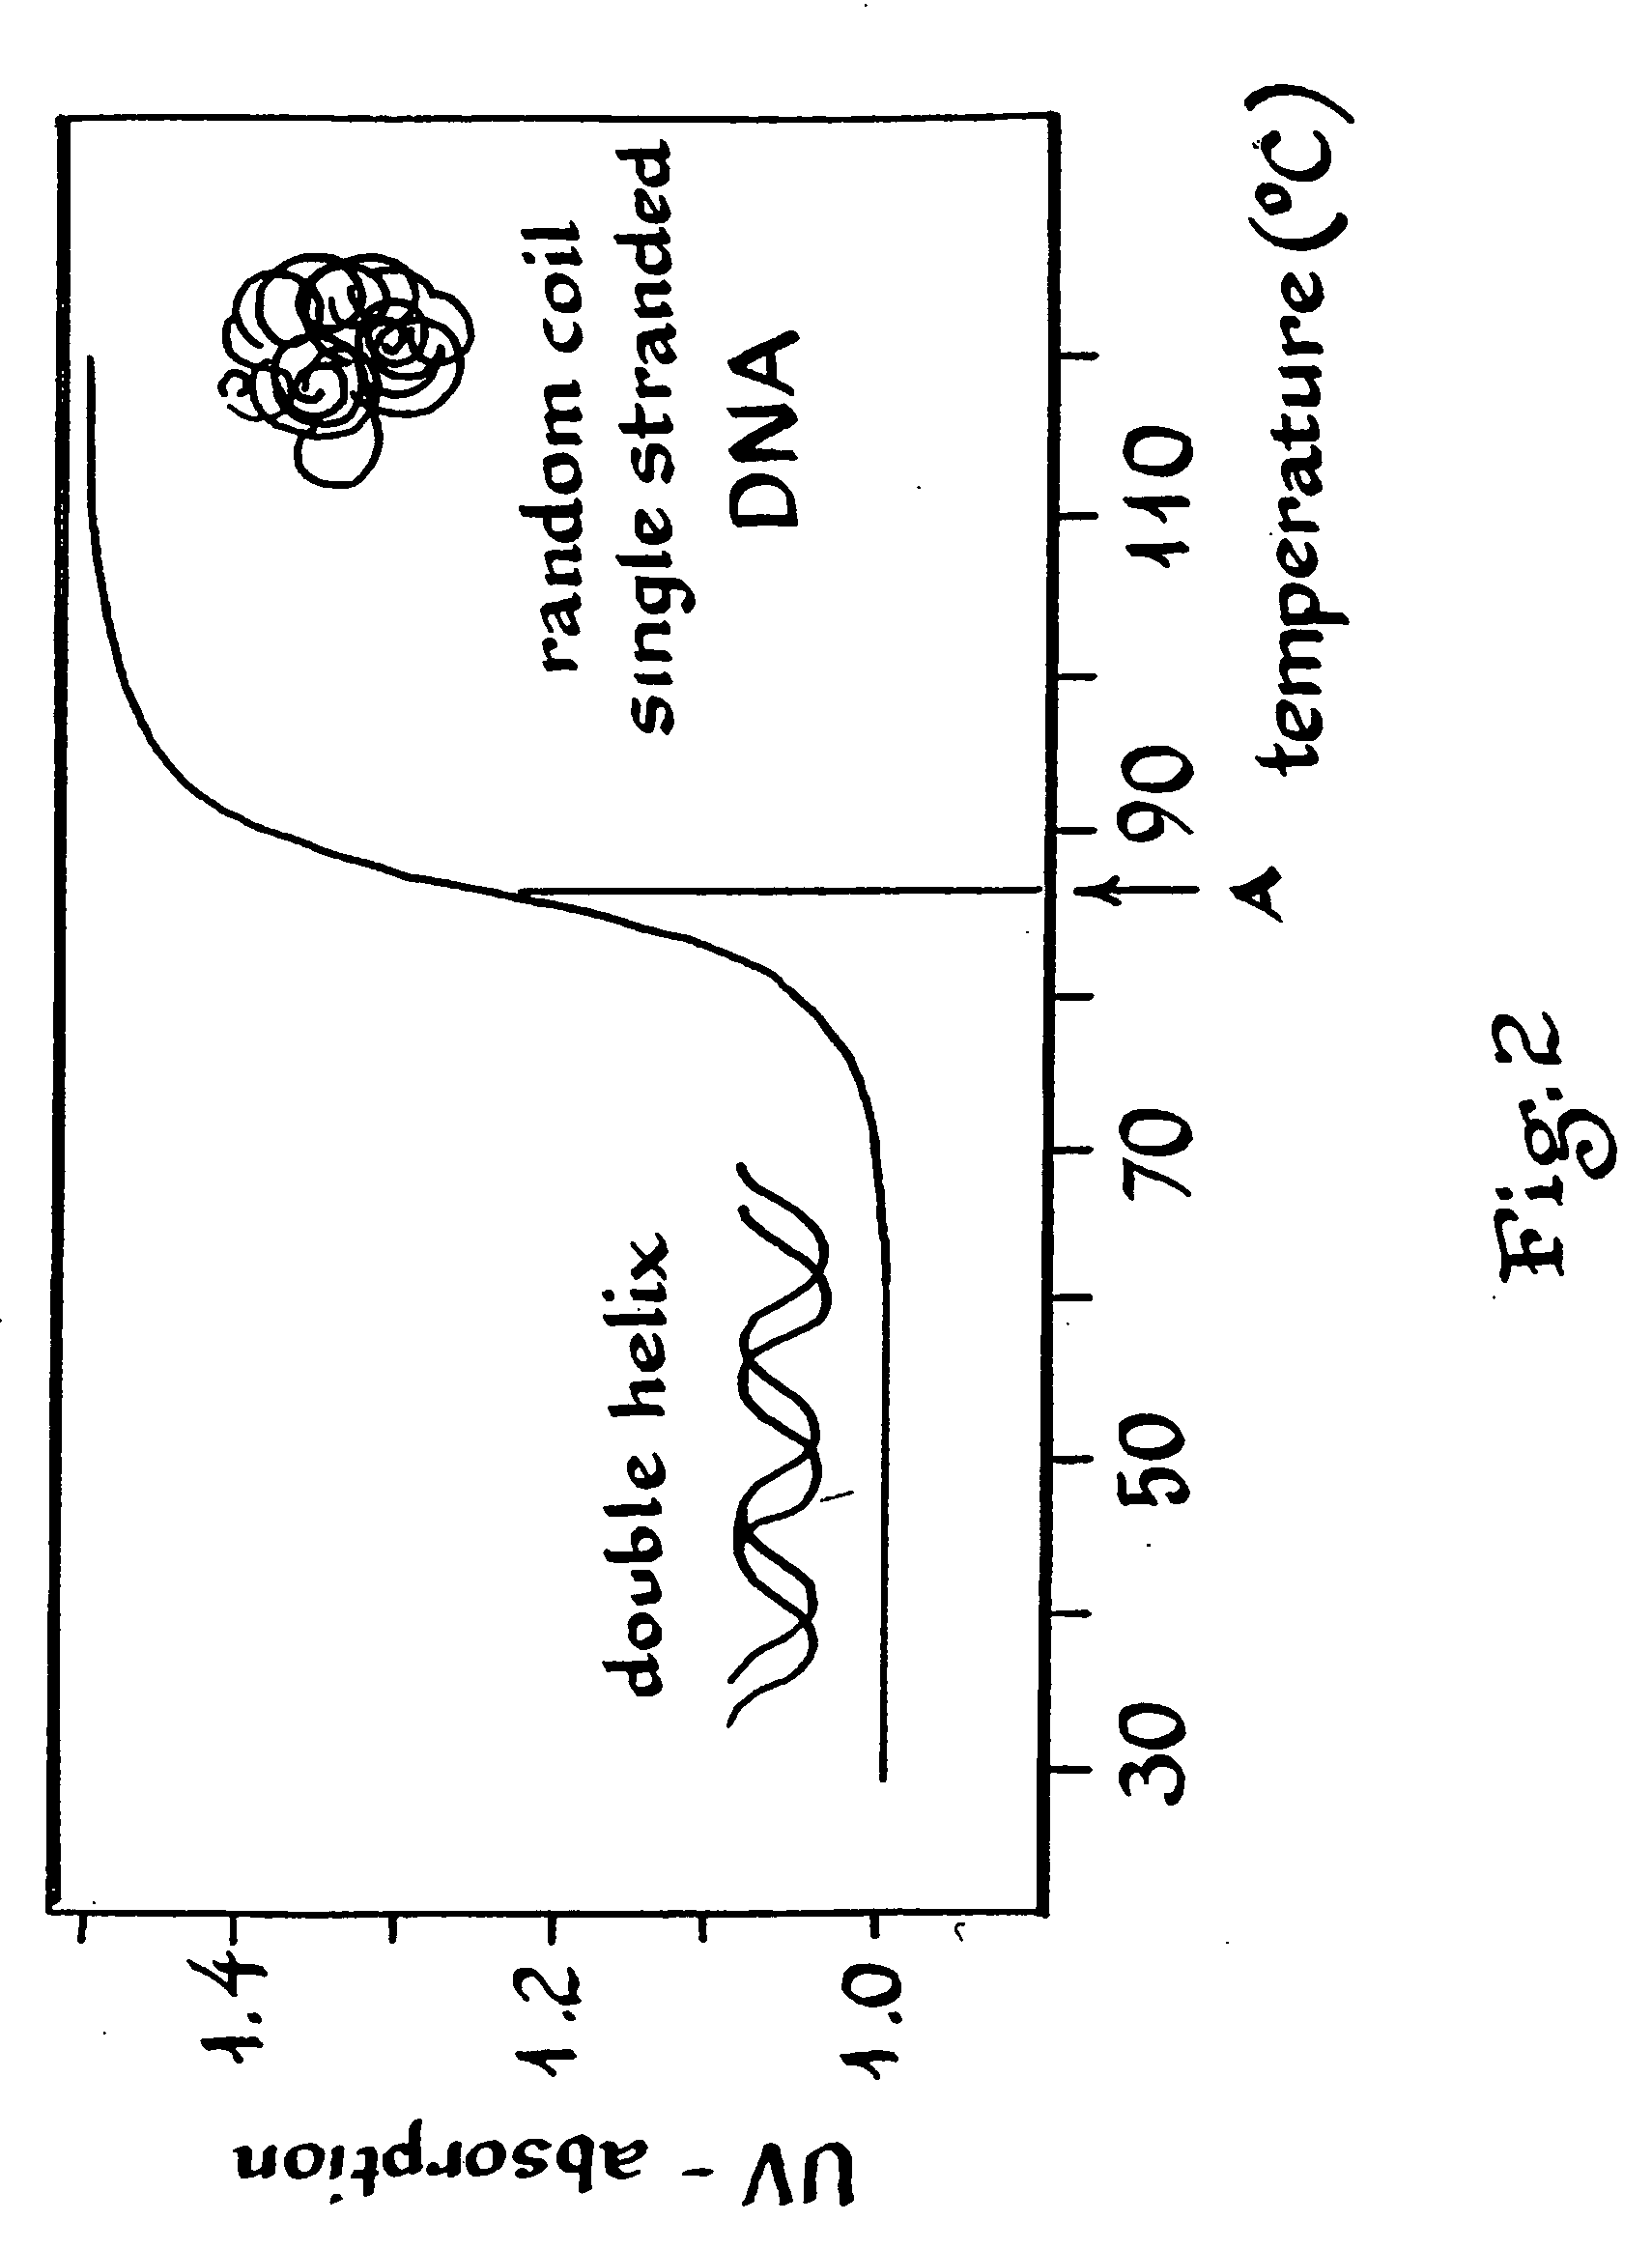 Differential photochemical and photomechanical processing